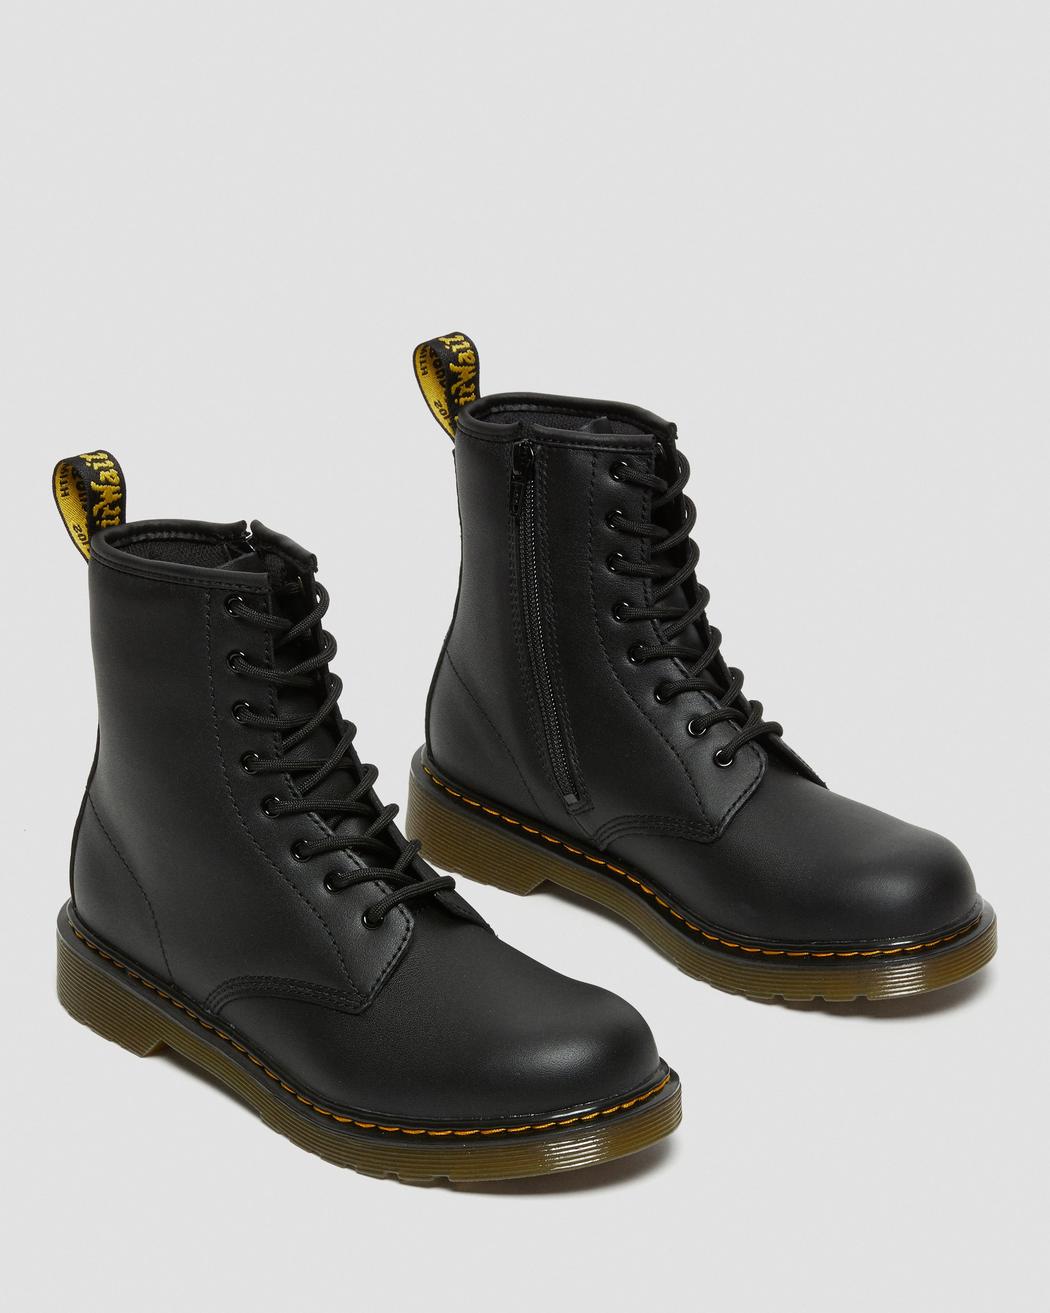 ANFIBI 1460 Y BLACK SOFTY T DR.MARTENS UNISEX BAMBINO